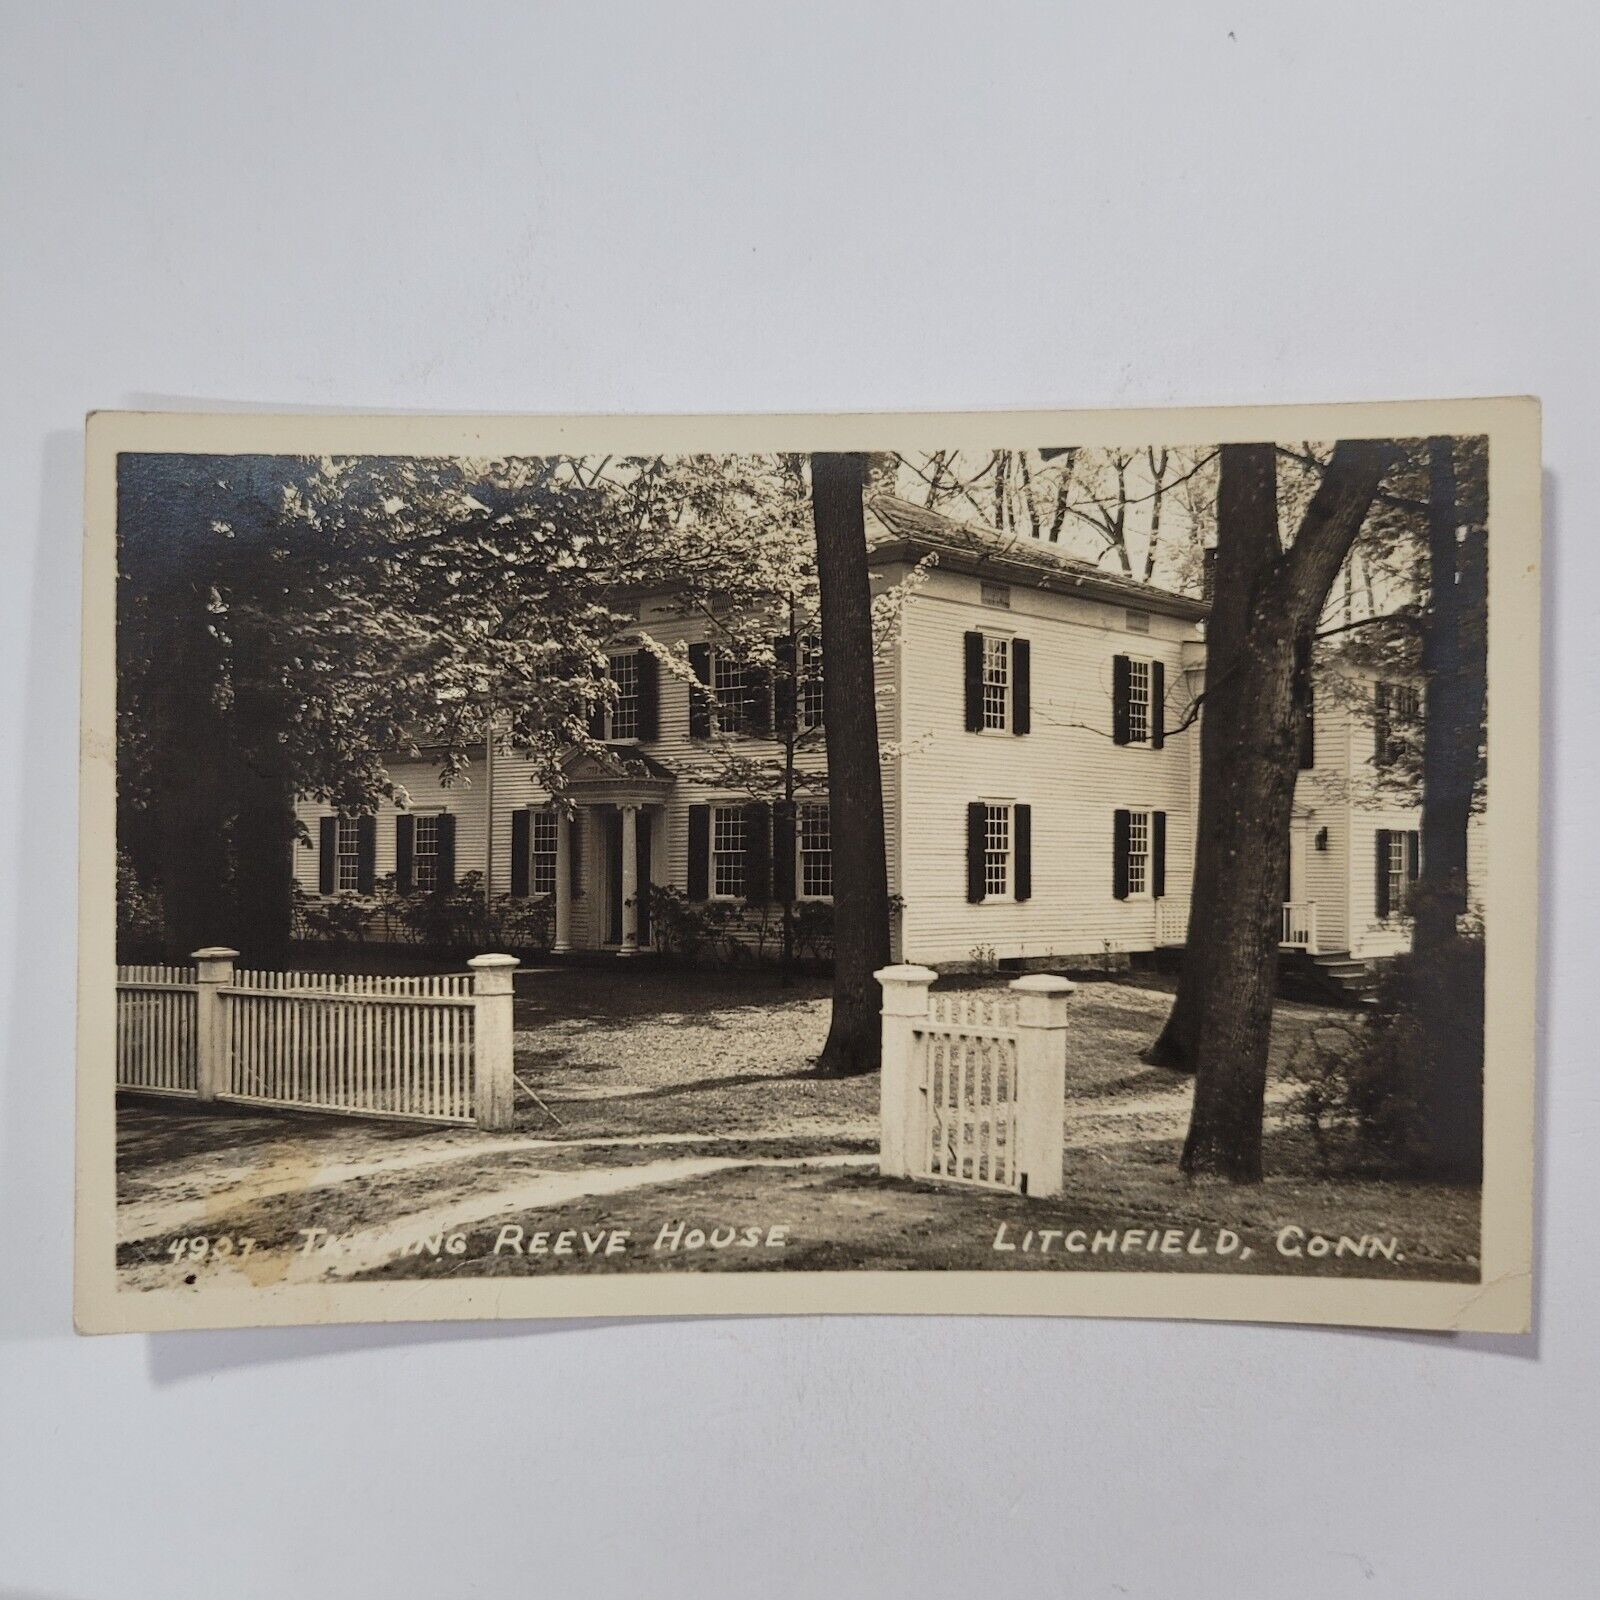 Tapping Reeve House Real Photo Postcard RPPC Litchfield Connecticut Street View